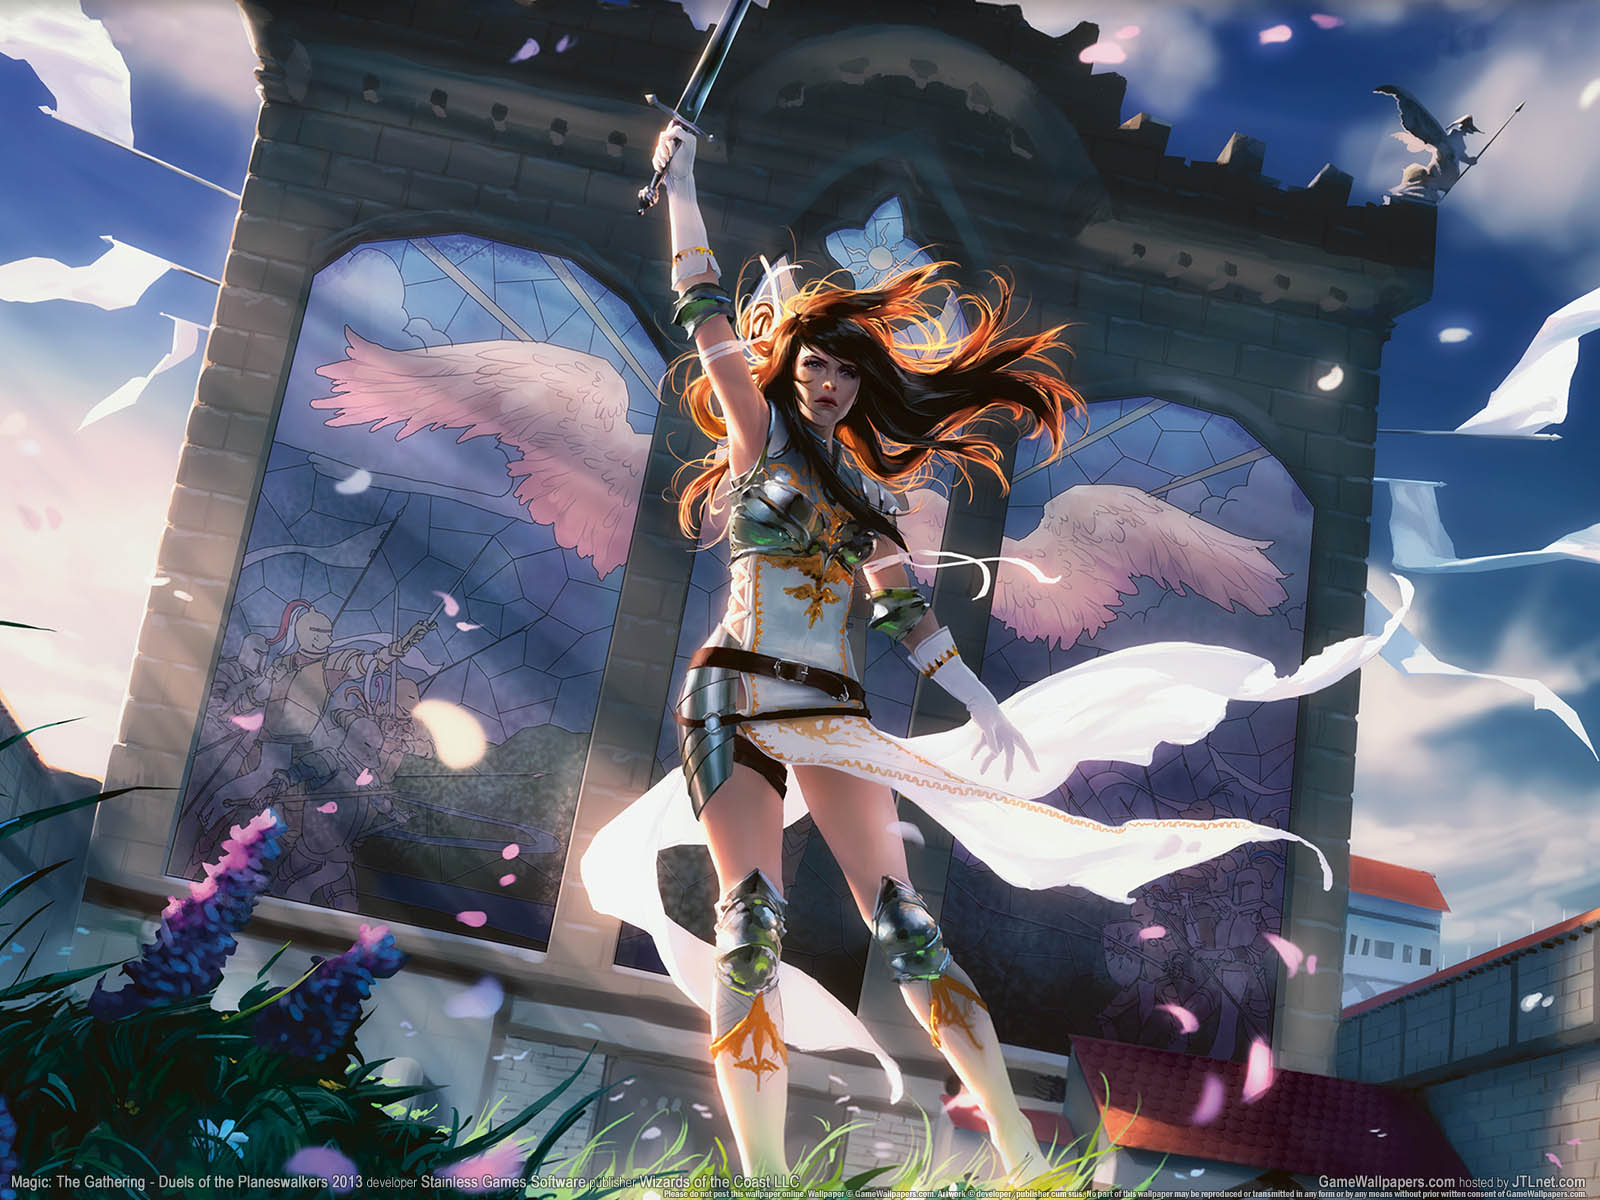 Magic%3A The Gathering - Duels of the Planeswalkers 2013 Hintergrundbild 01 1600x1200